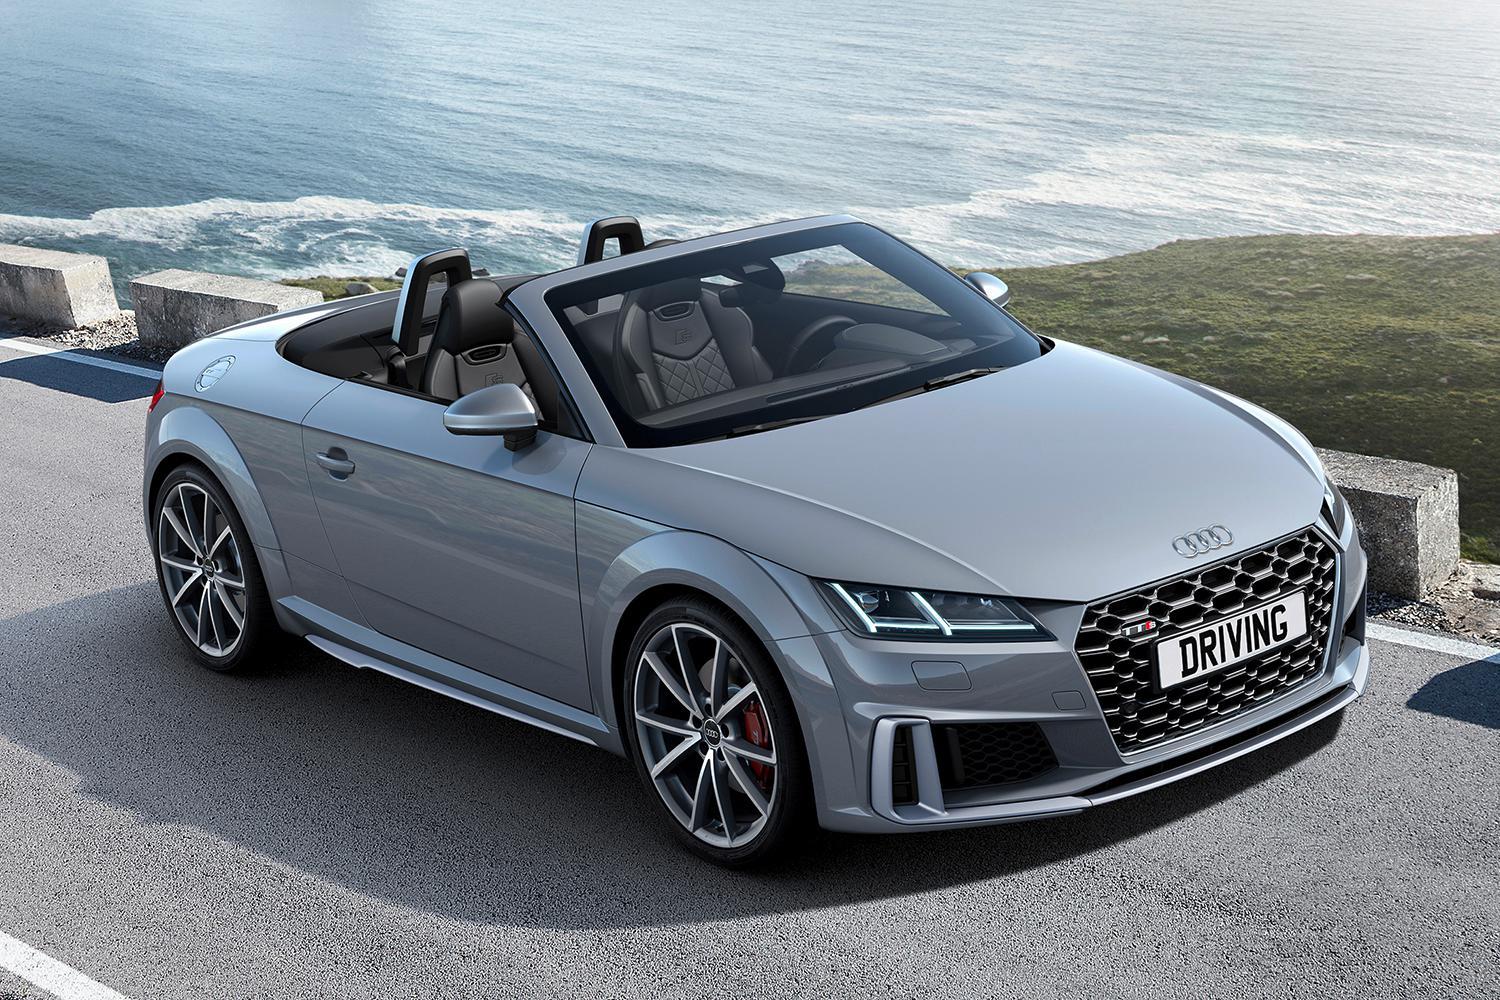 The Clarkson Review: Audi TTS roadster